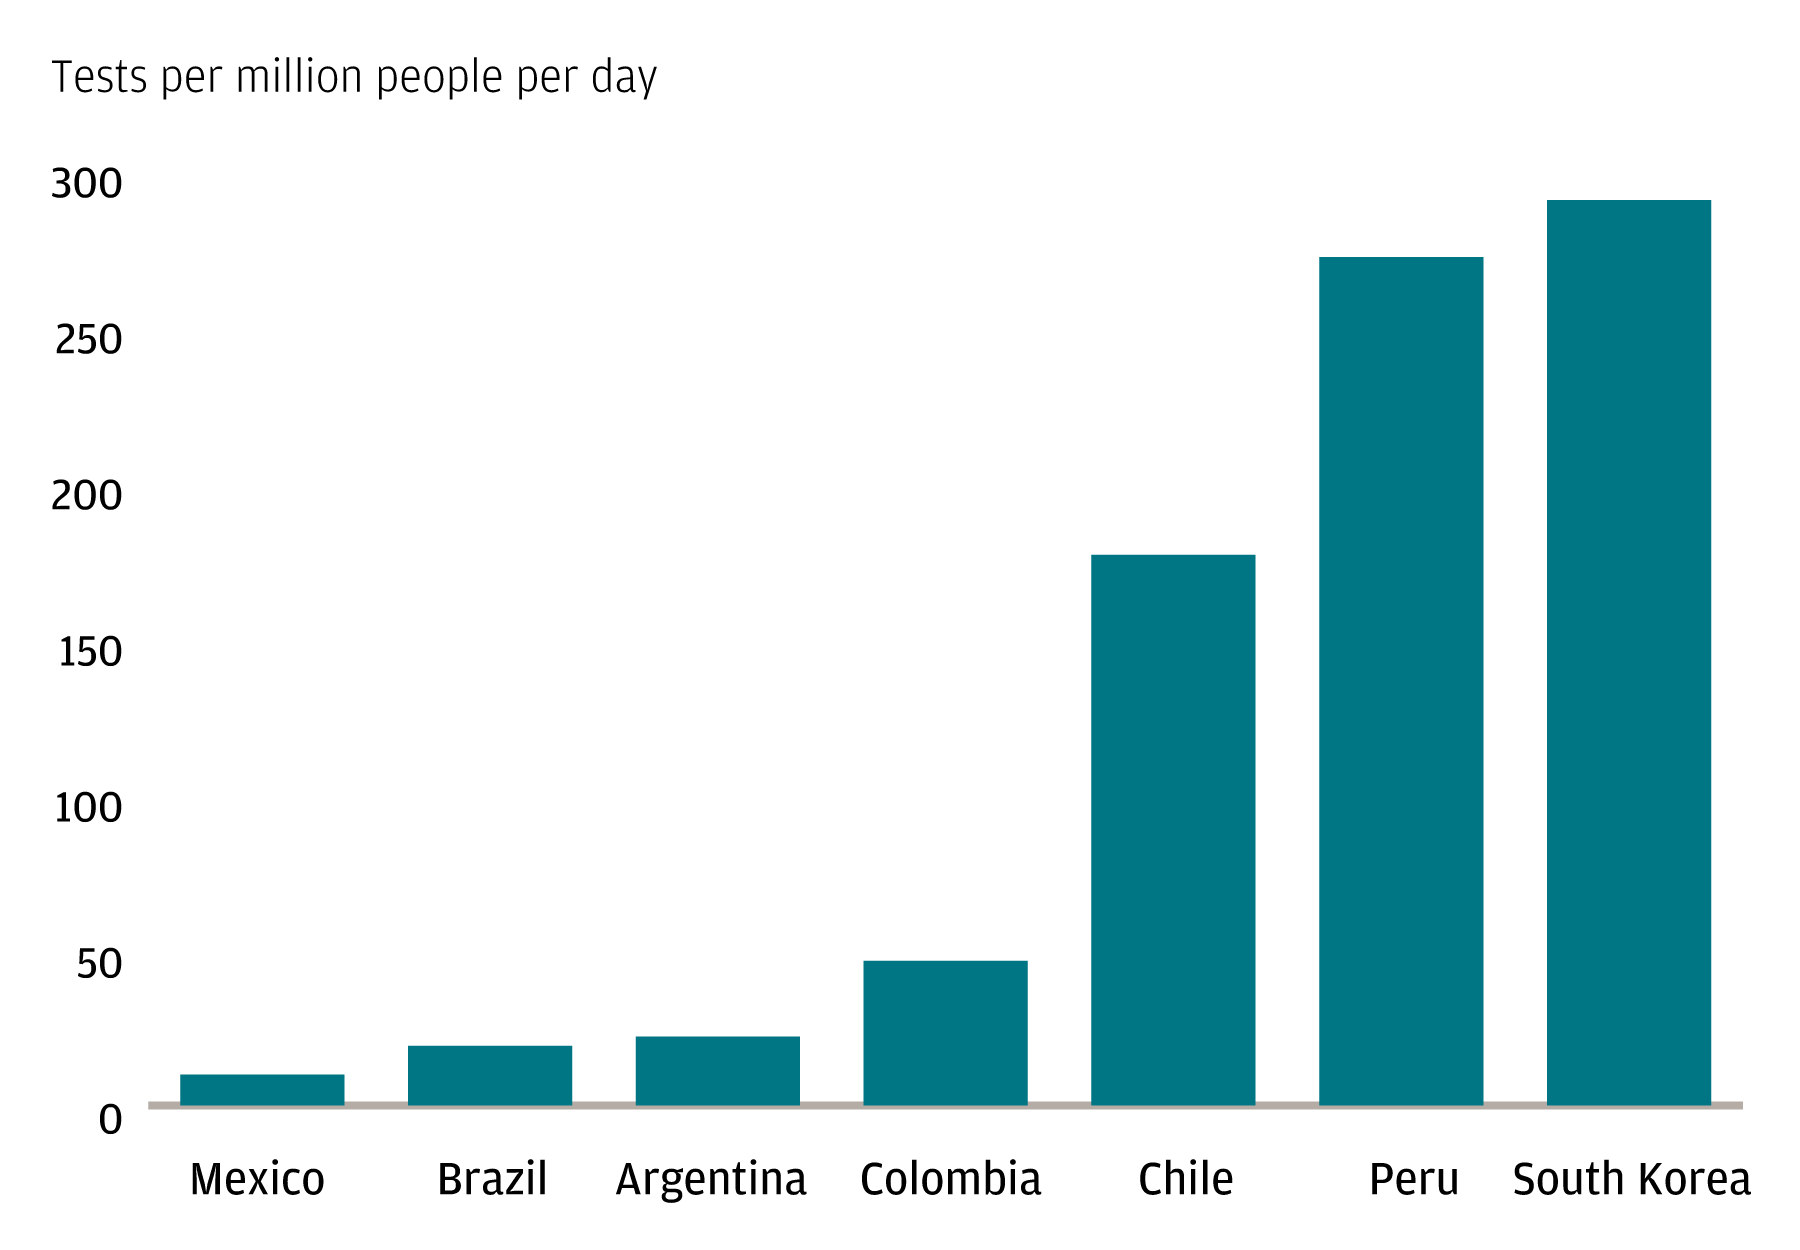 A chart showing the COVID-19 testing rate in select economies (tests per million people per day)—Mexico, Brazil, Argentina, Colombia, Chile, Peru and South Korea.